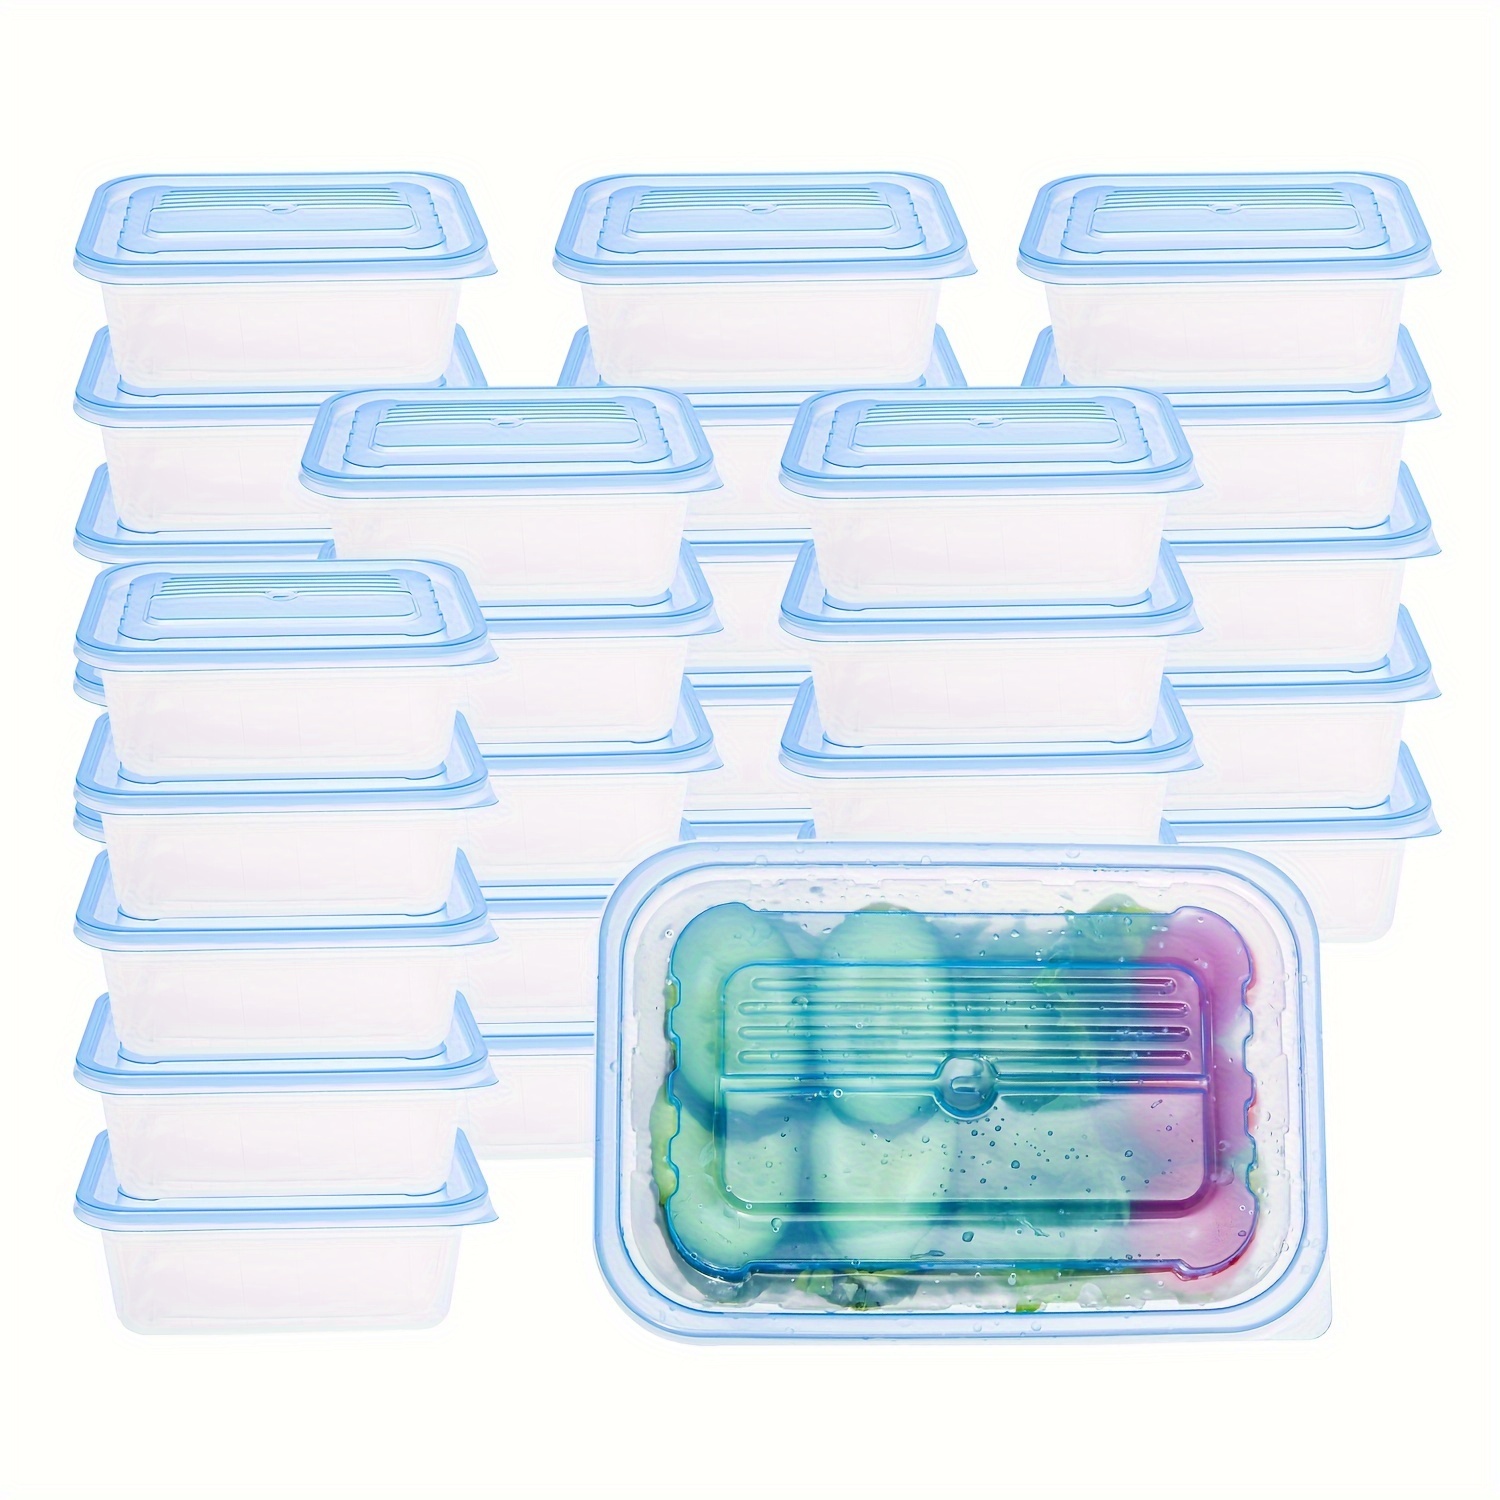 38oz Meal Prep Containers, Extra Large &Thick Food Storage Containers with  Lids, Reusable Plastic,Disposable Bento